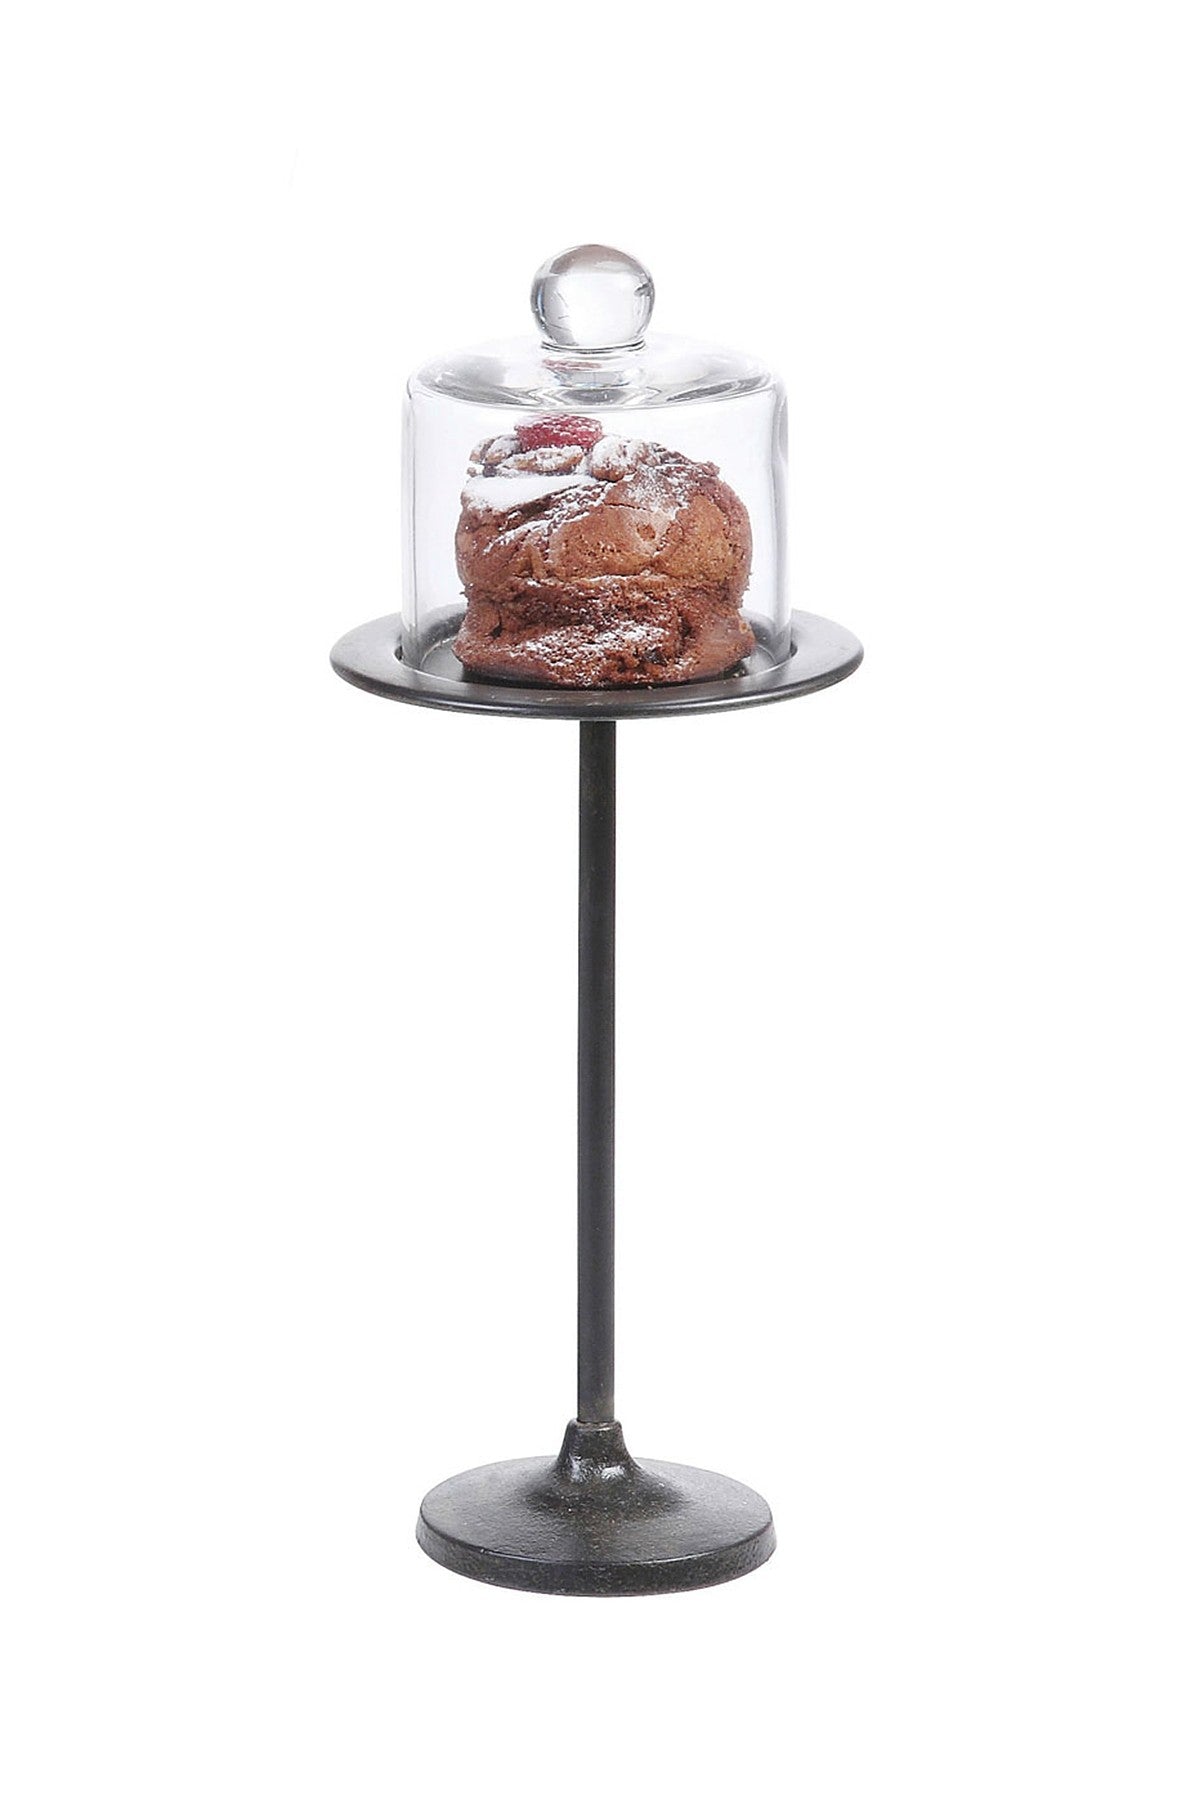 Tall Metal Bakery Cupcake Stand with Glass Cloche